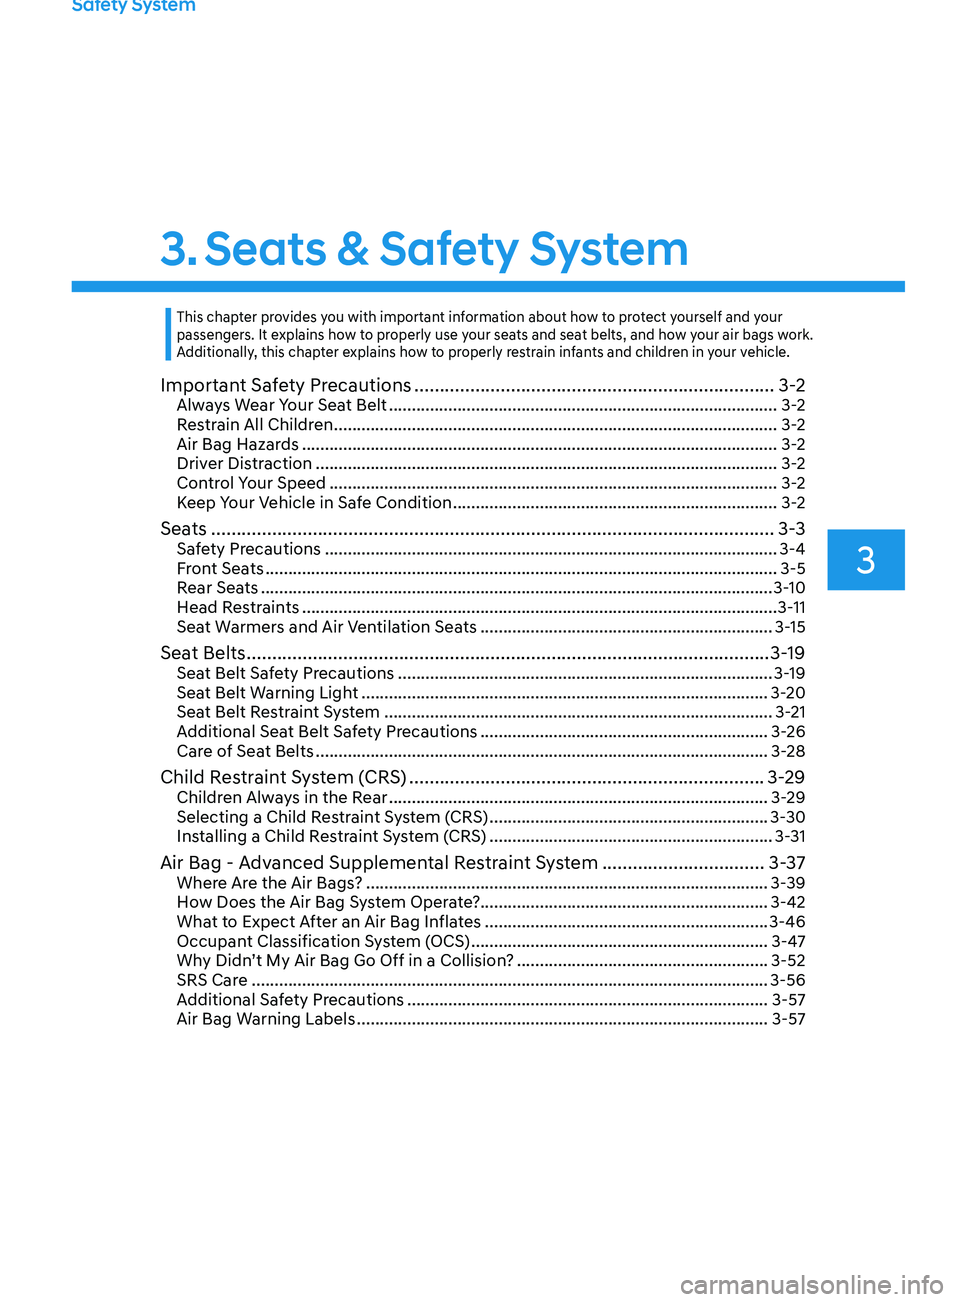 HYUNDAI SONATA LIMITED 2022  Owners Manual Safety System
3. Seats & Safety System
3
Important Safety Precautions ....................................................................... 3 -2Always Wear Your Seat Belt ...........................